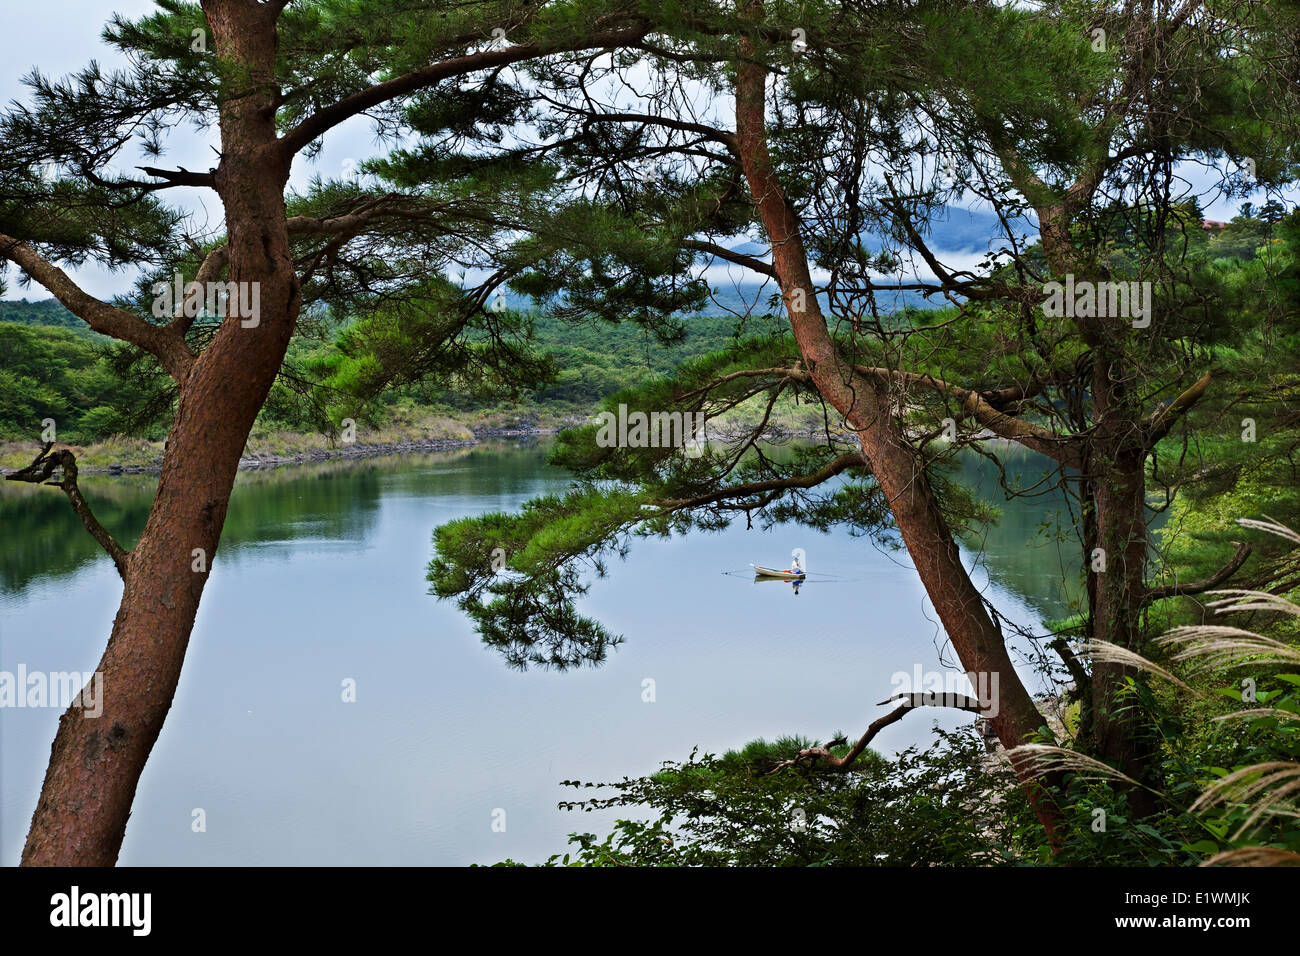 The smallest of the five lakes that surround the northern base of Mount Fuji, Lake Shoji is part of the Fuji-Hakone-Izu National Stock Photo